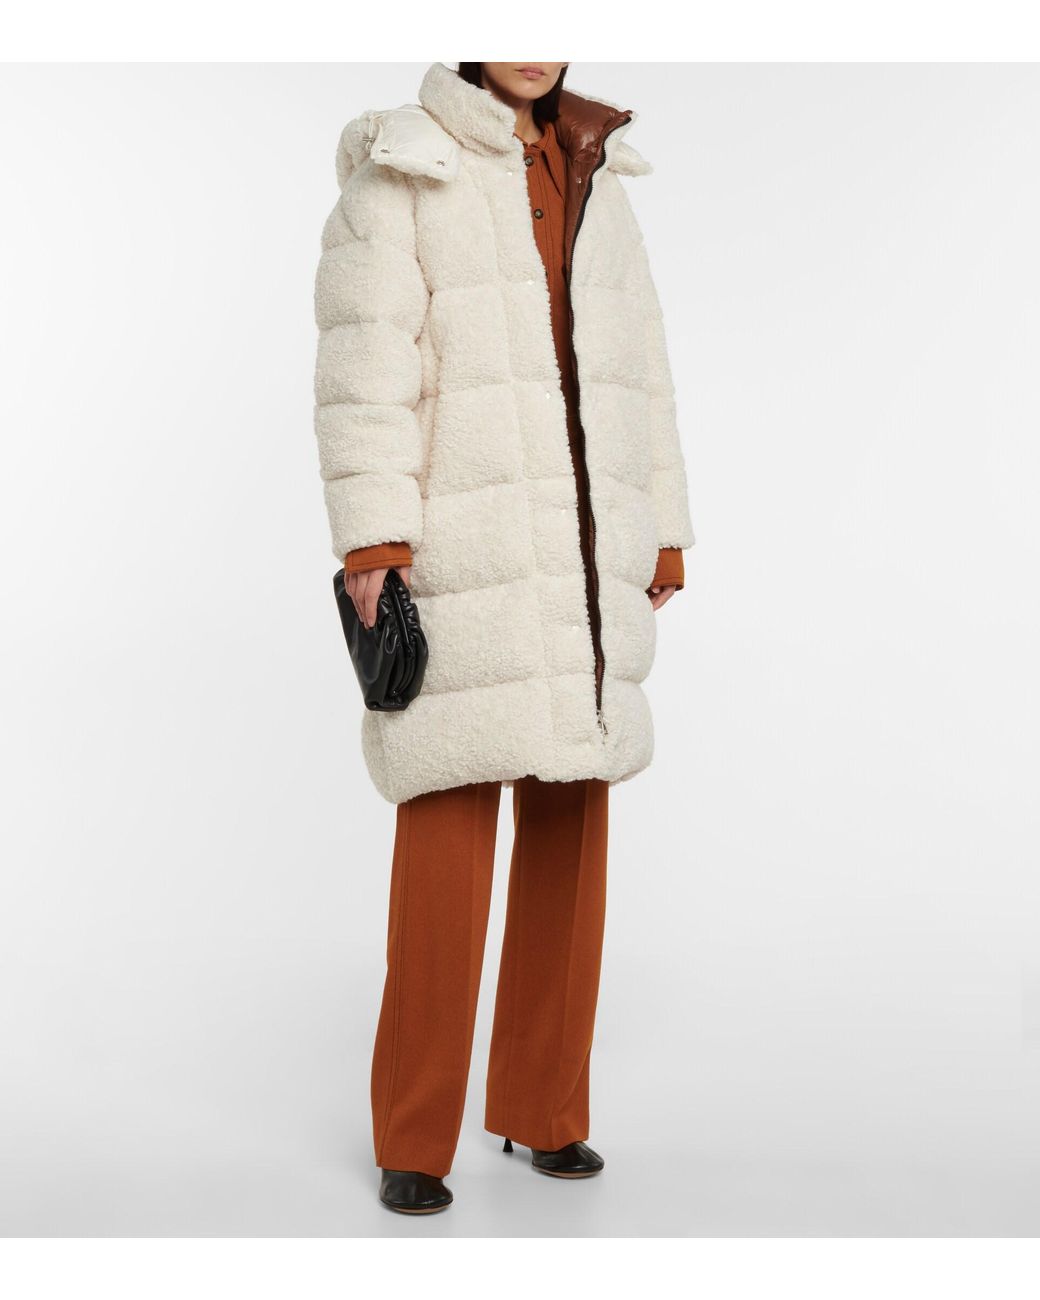 Moncler Hainardia Faux Fur Down Coat in Gray | Lyst